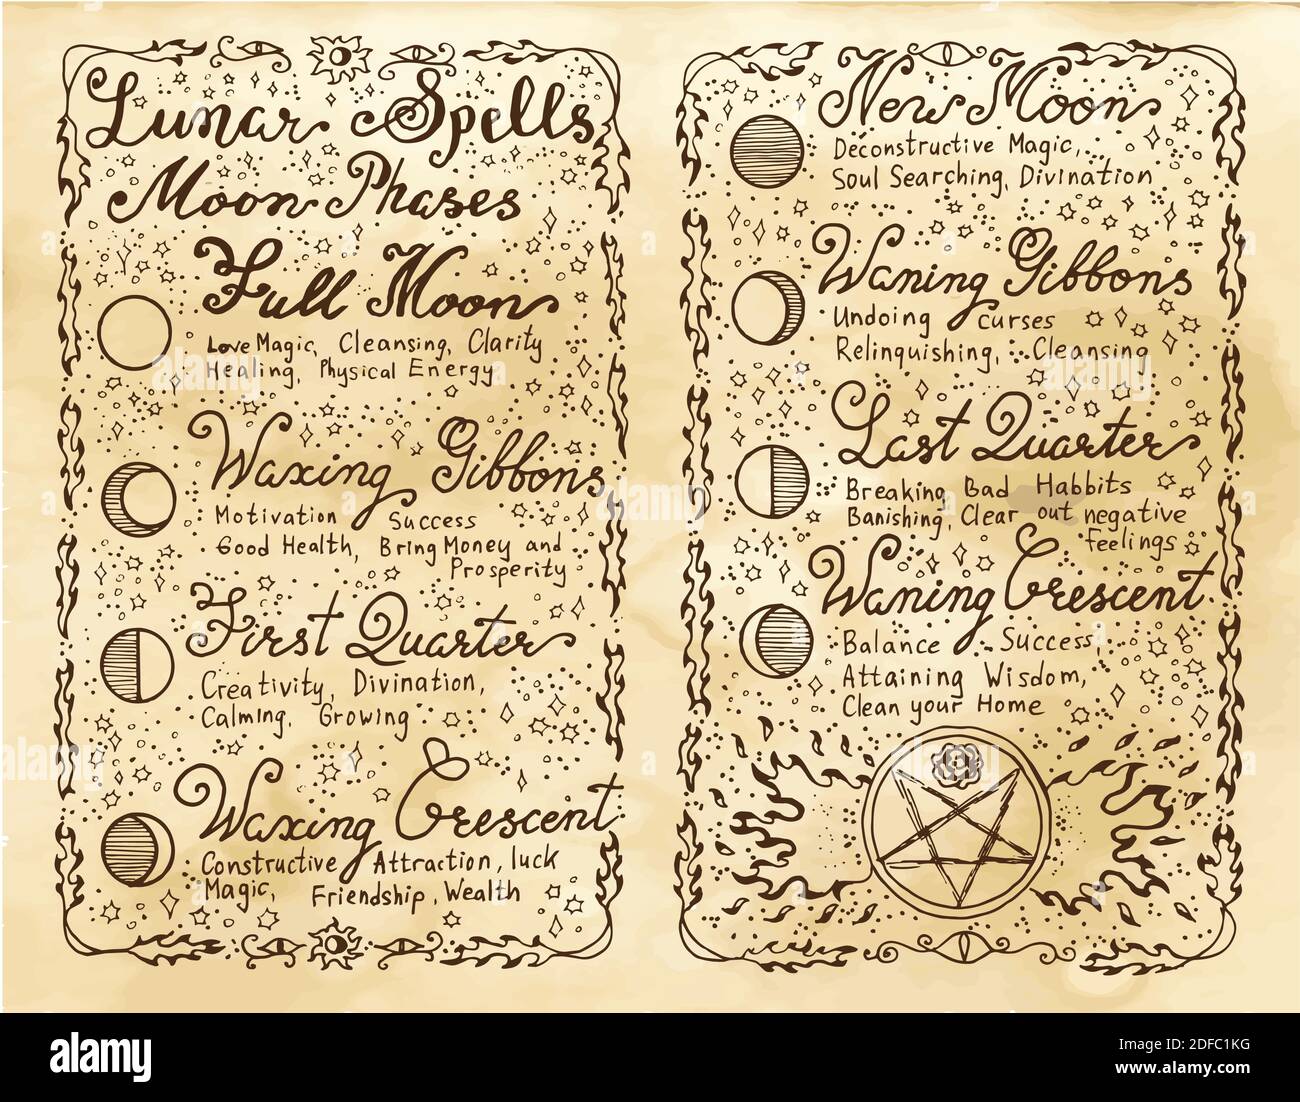 Old pages with lunar magic spells. Occult, esoteric, divination and wicca concept. Vintage background with moon phases and hand writing text Stock Vector